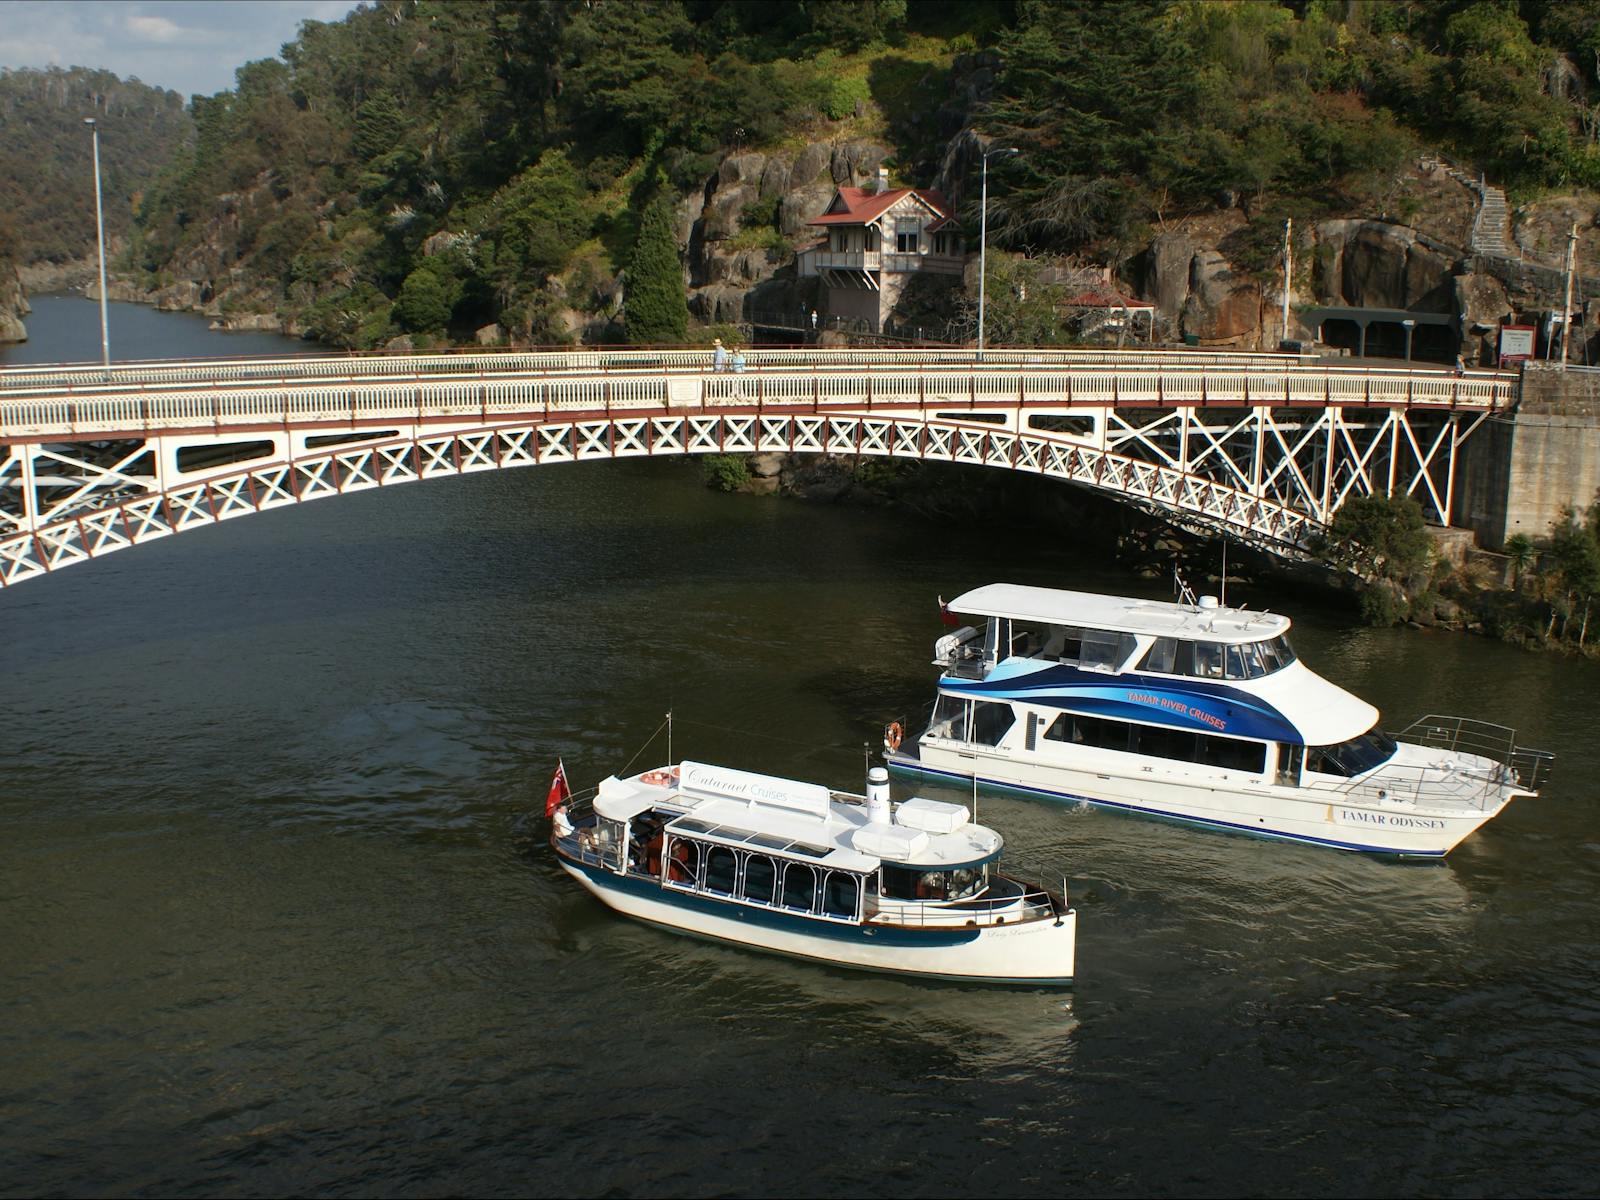 Lady Launceston and Tamar Odyssey at the entrance to Cataract Gorge